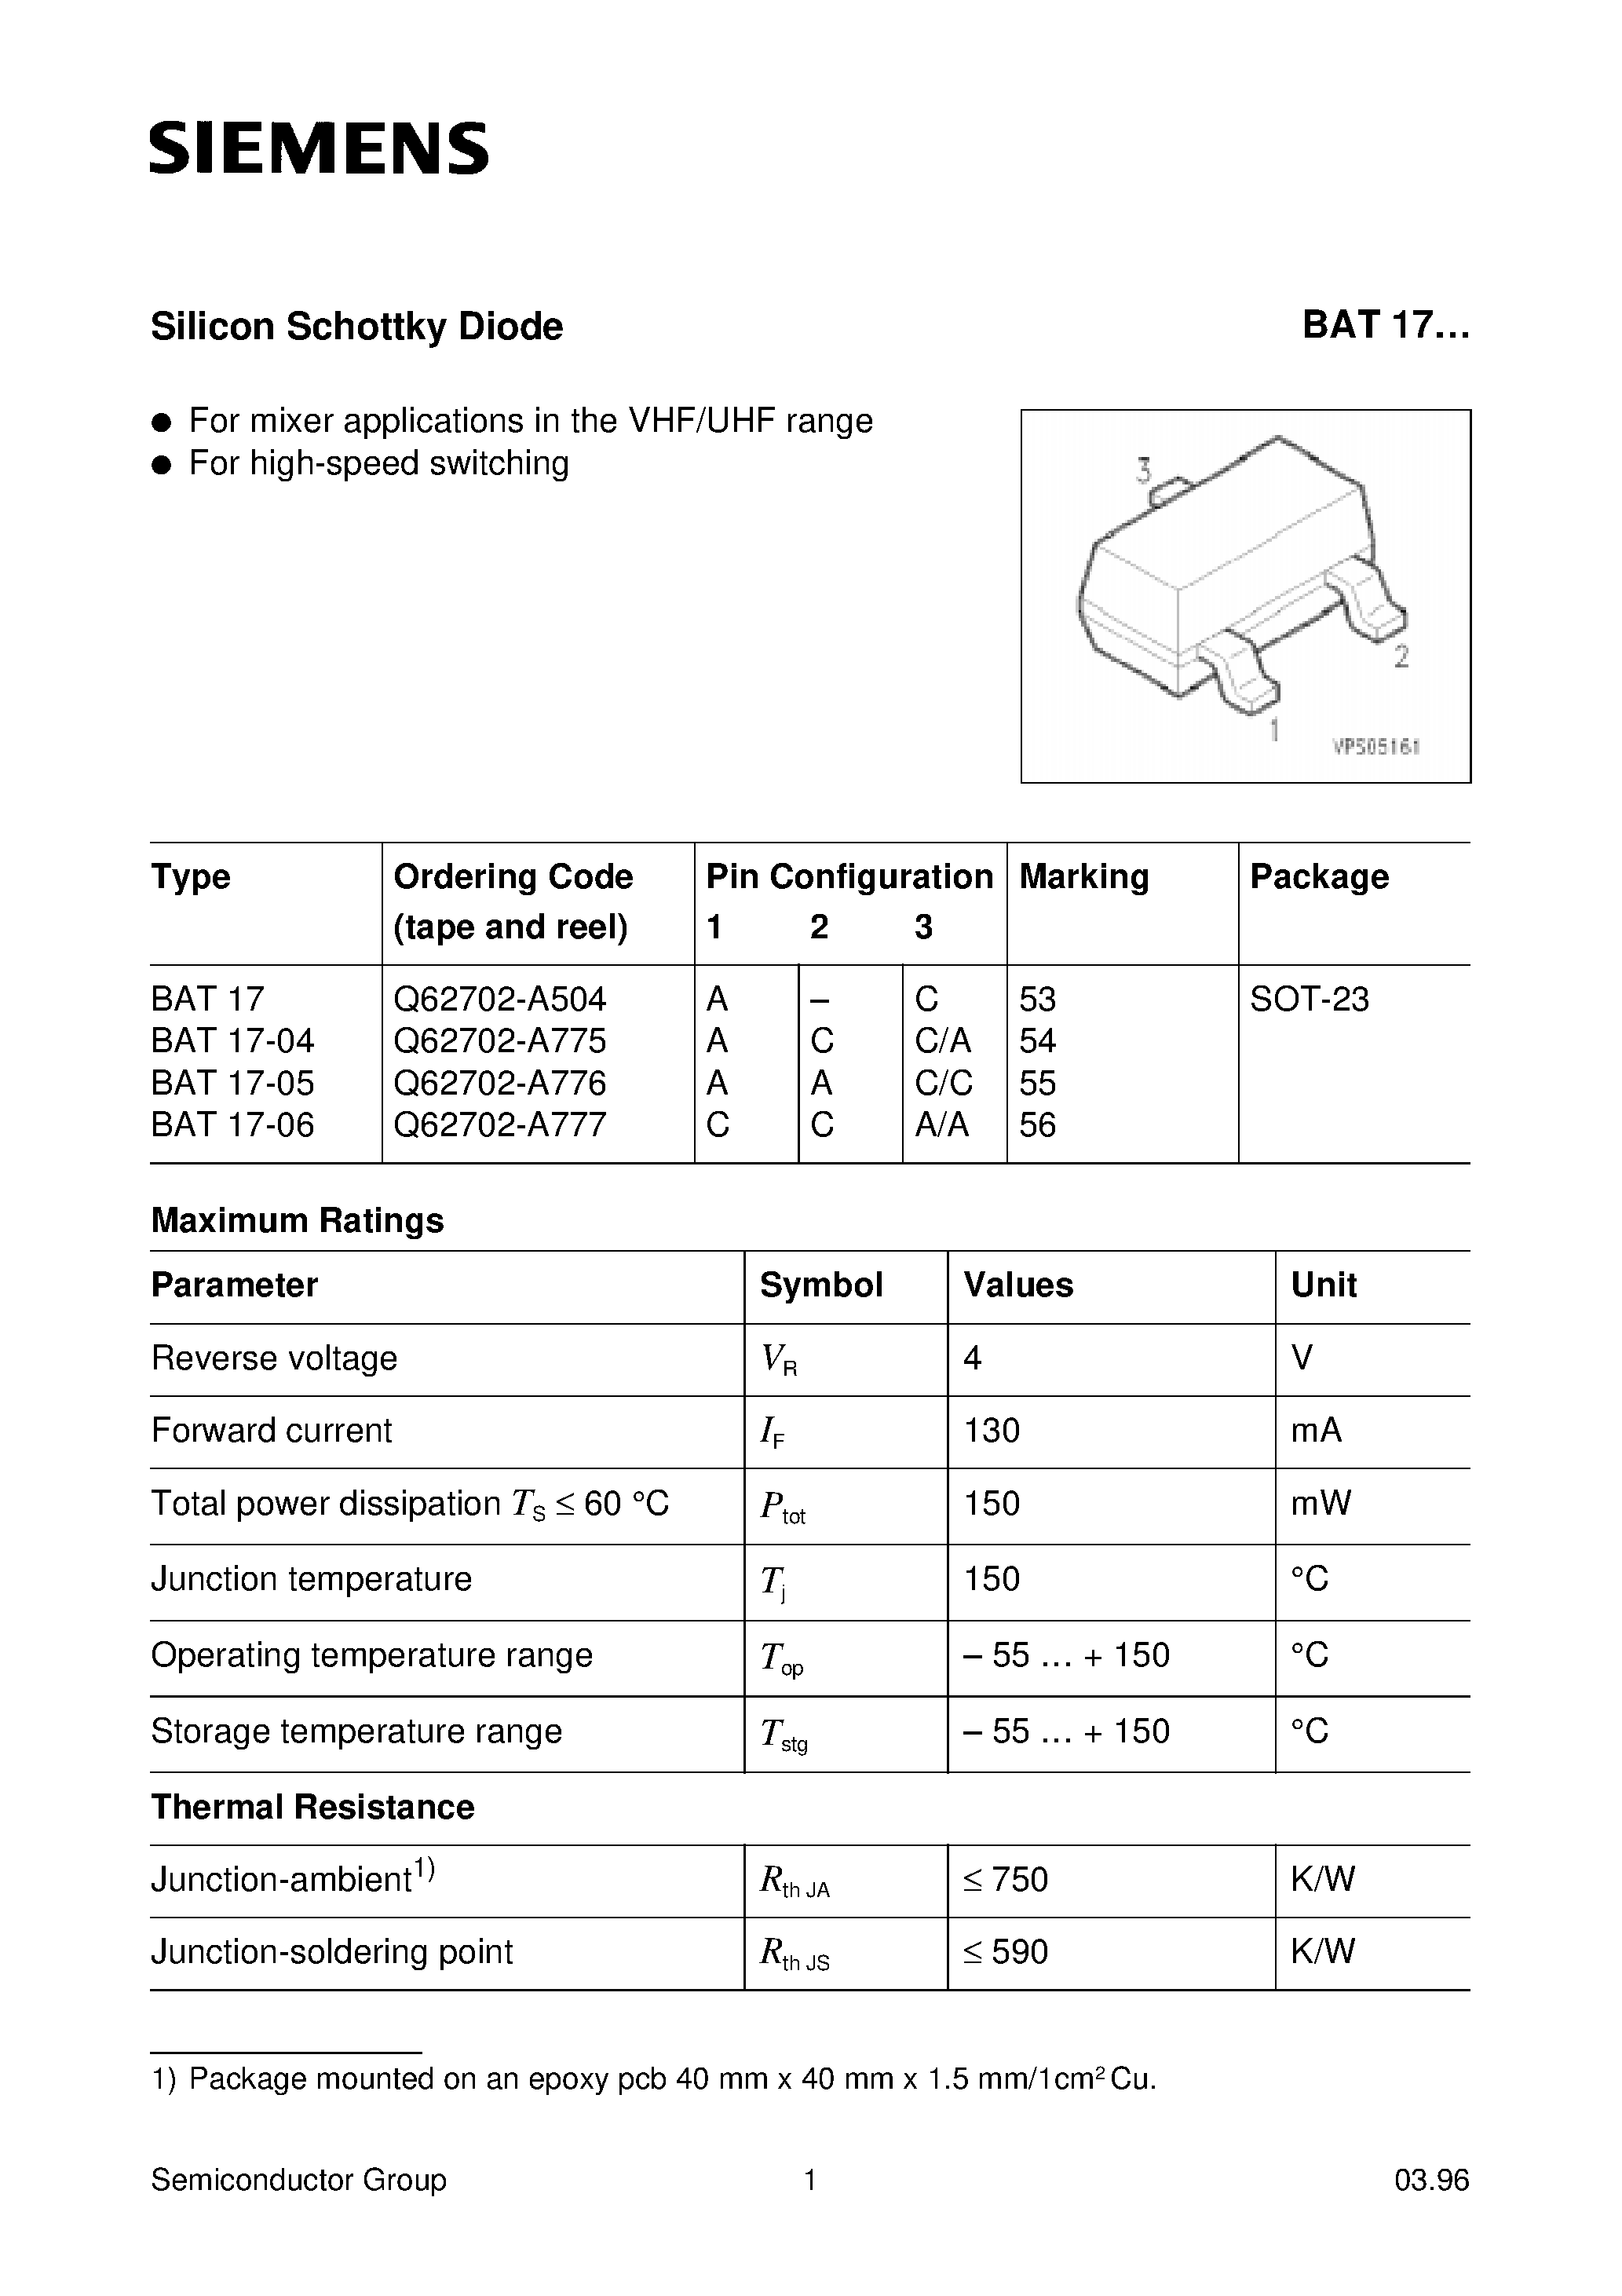 Datasheet BAT17-06 - Silicon Schottky Diode (For mixer applications in the VHF/UHF range For high-speed switching) page 1